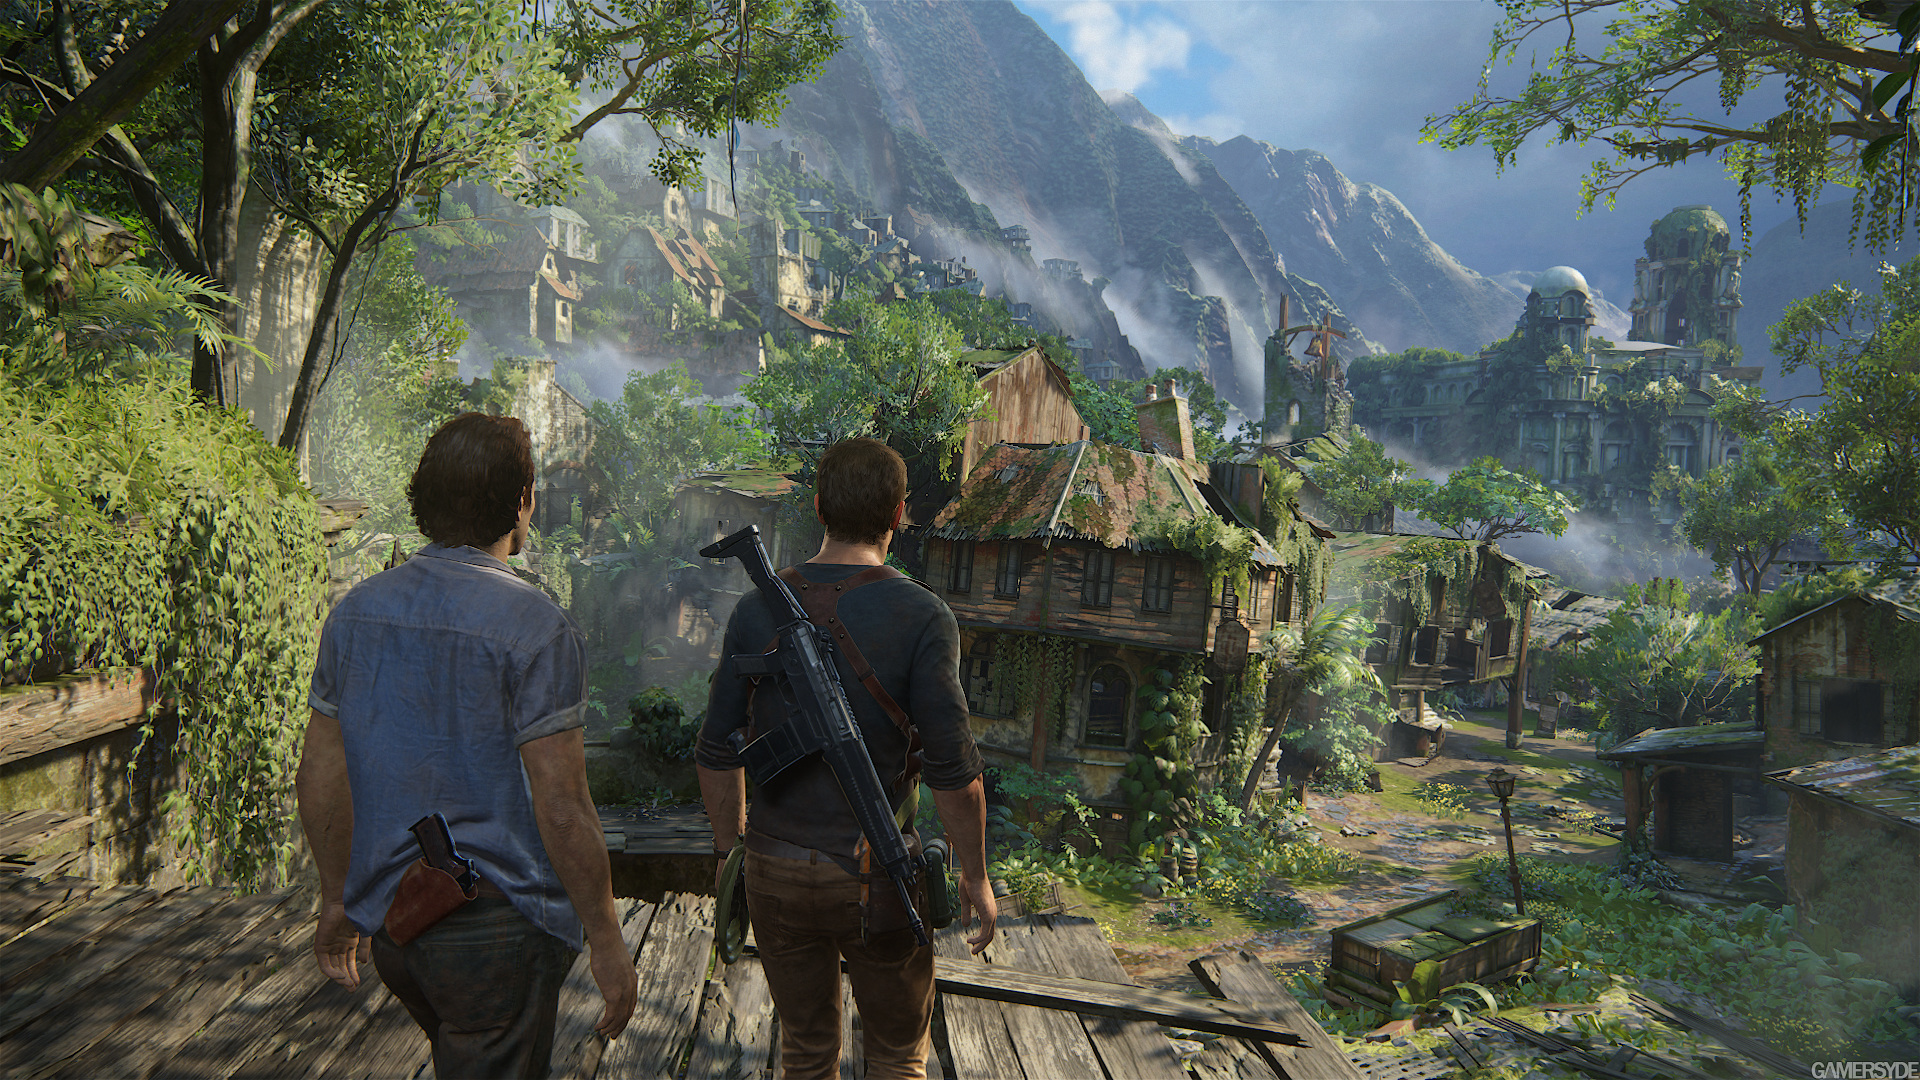 image_uncharted_4_a_thief_s_end-30961-2995_0002.jpg